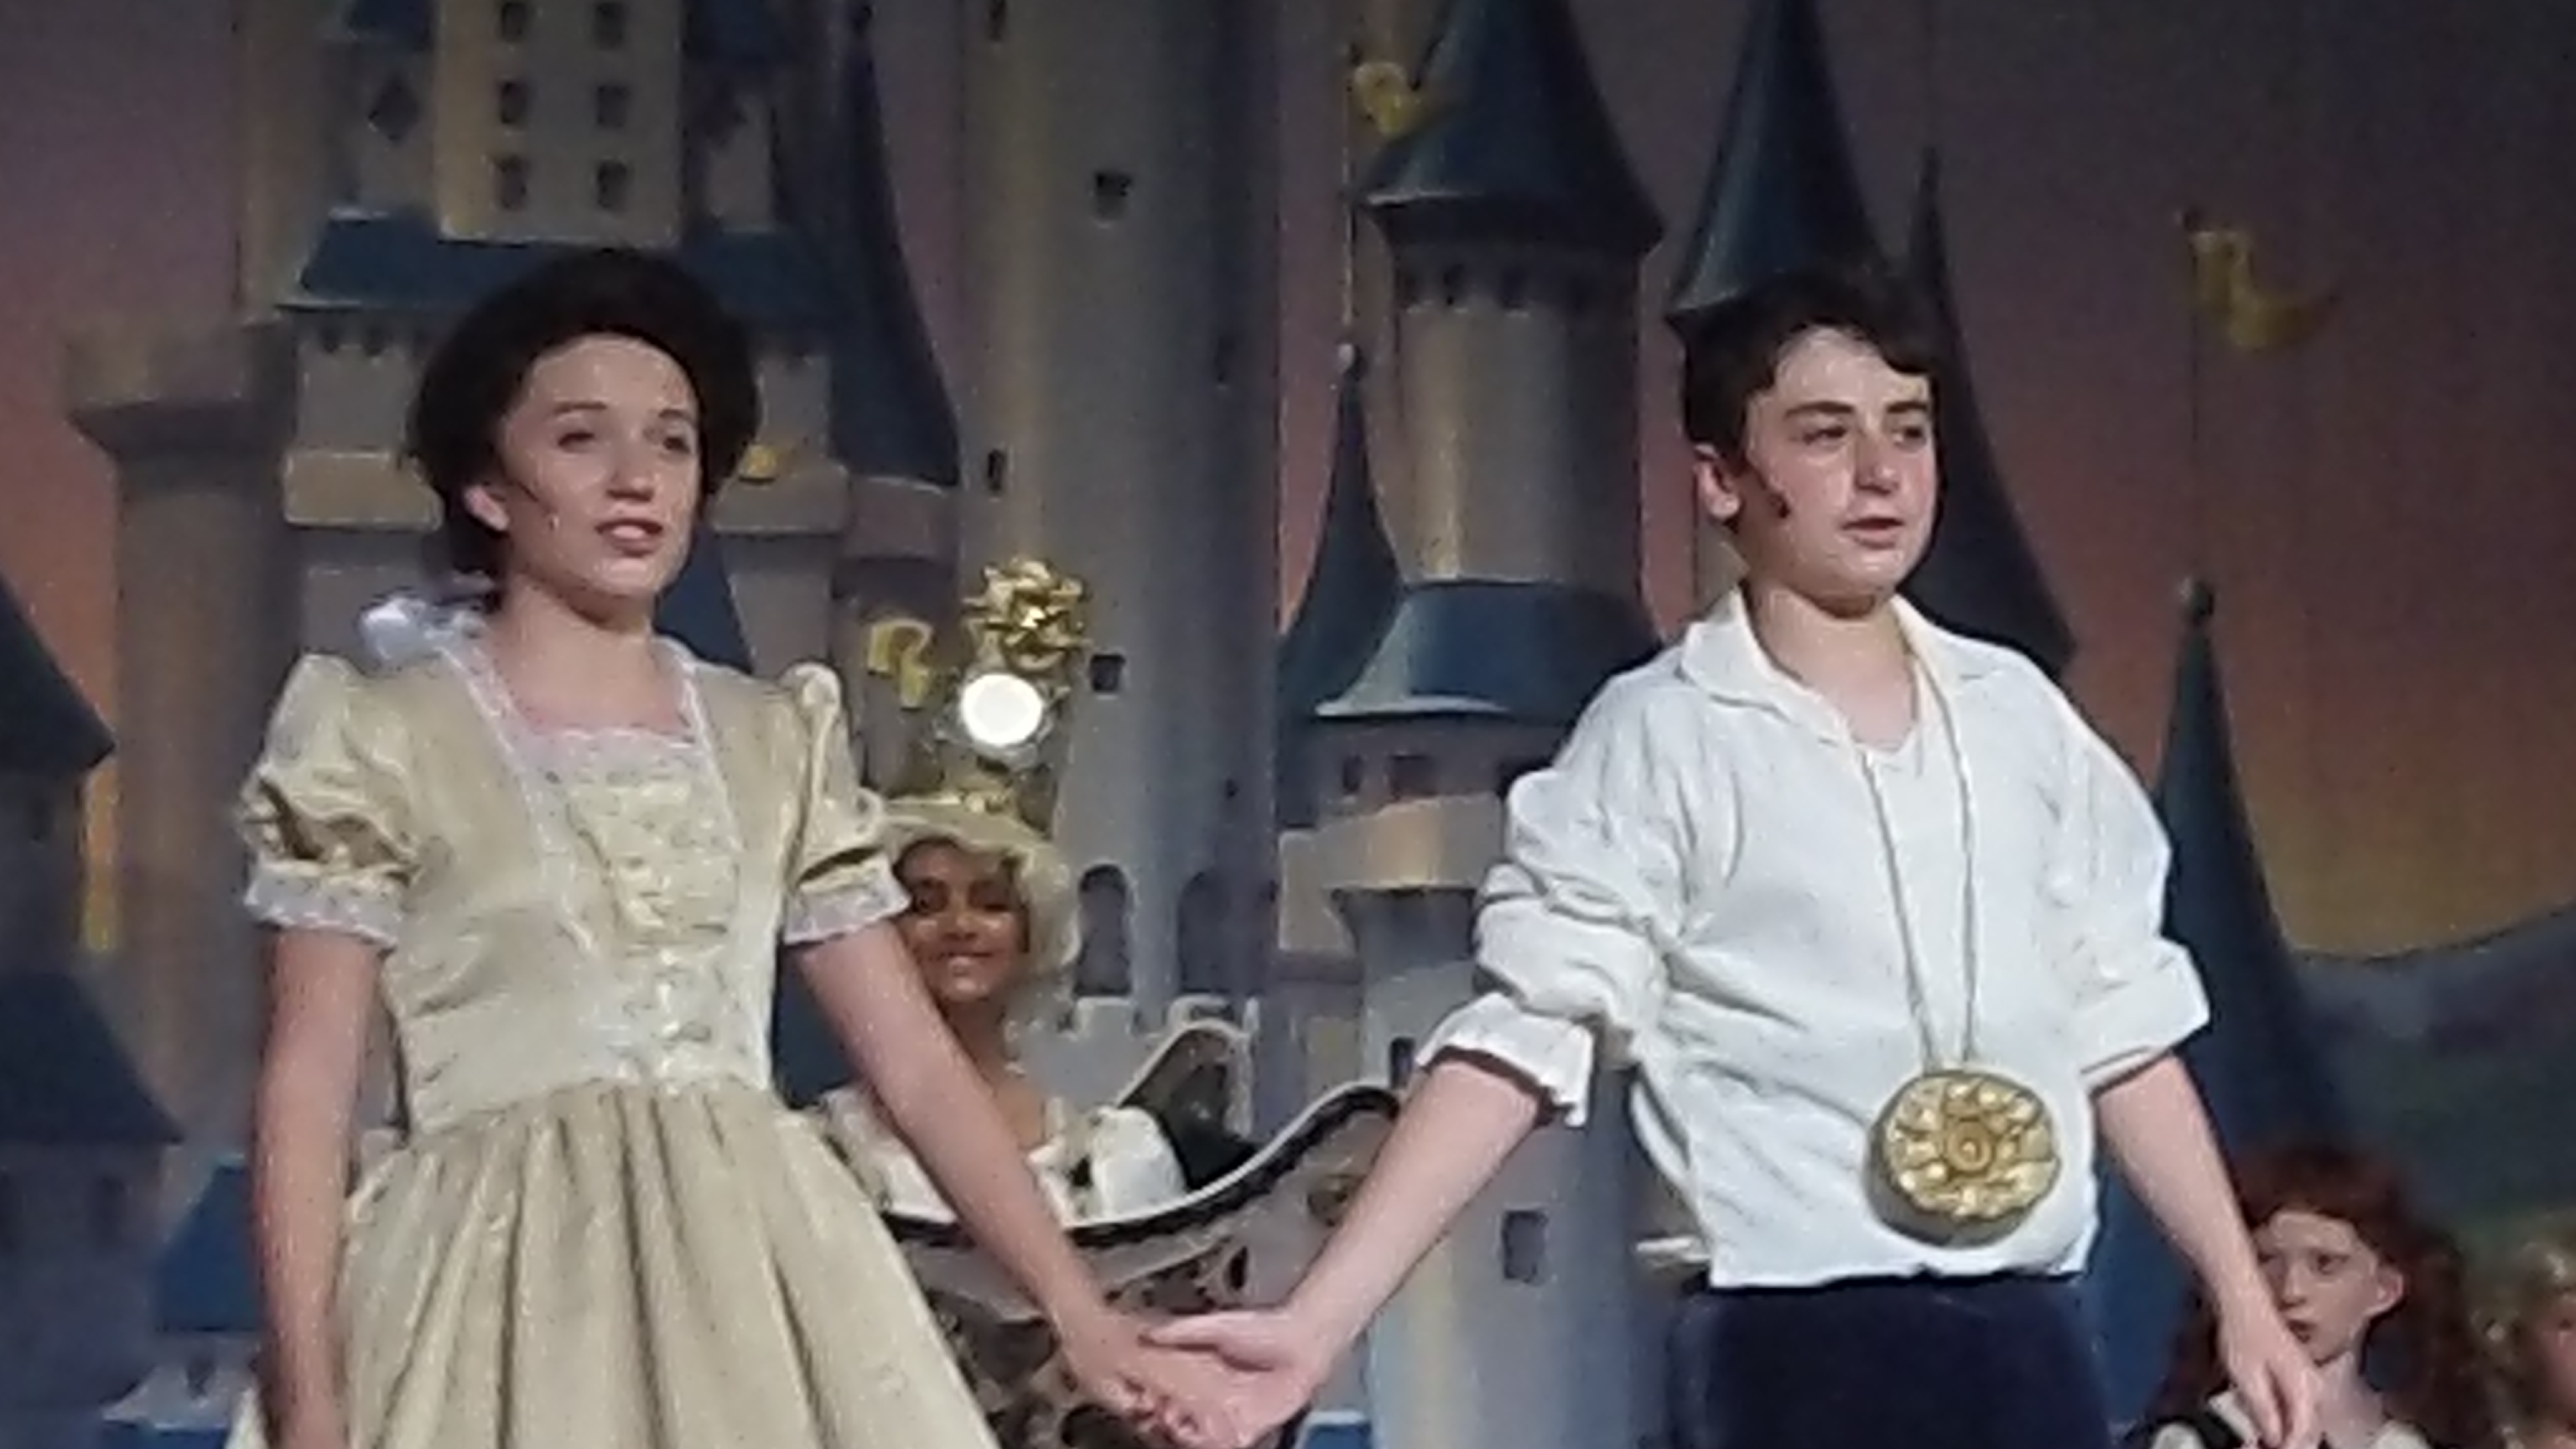 Adam as the Beast in Beauty and the Beast at Yorktown stage, summer 2012